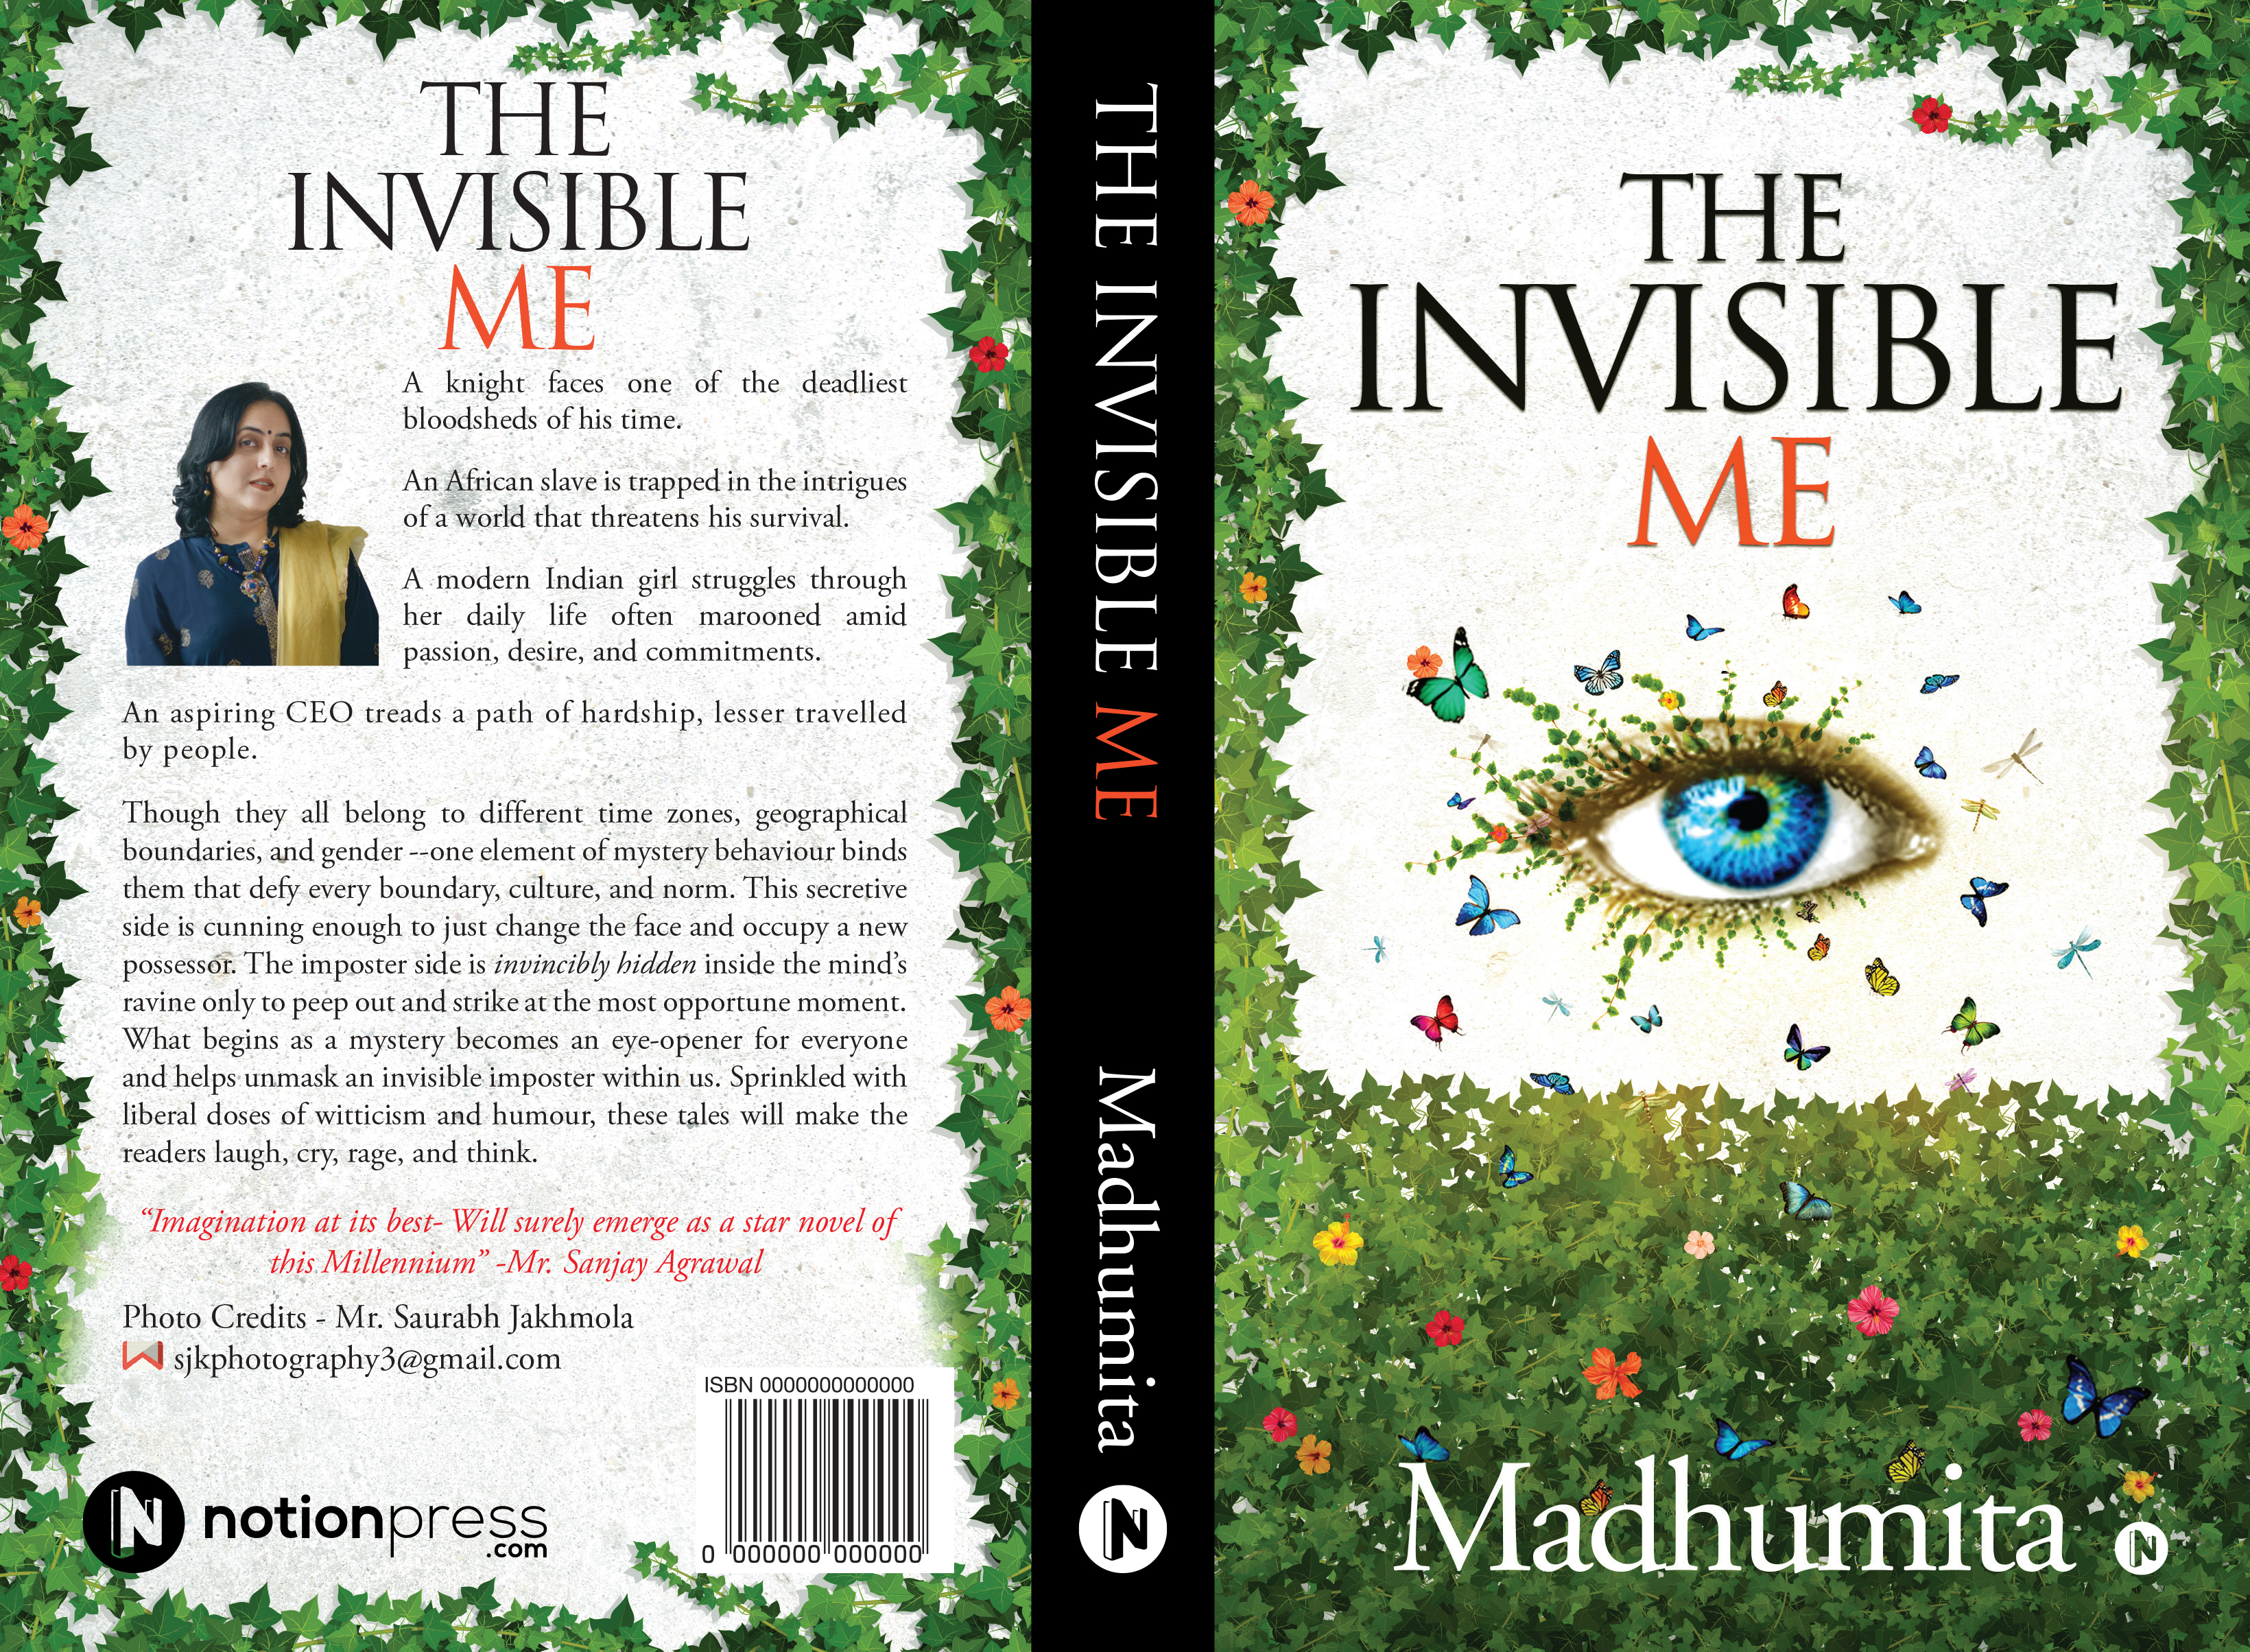 FREE: “The Invisible Me” by Mafhumita